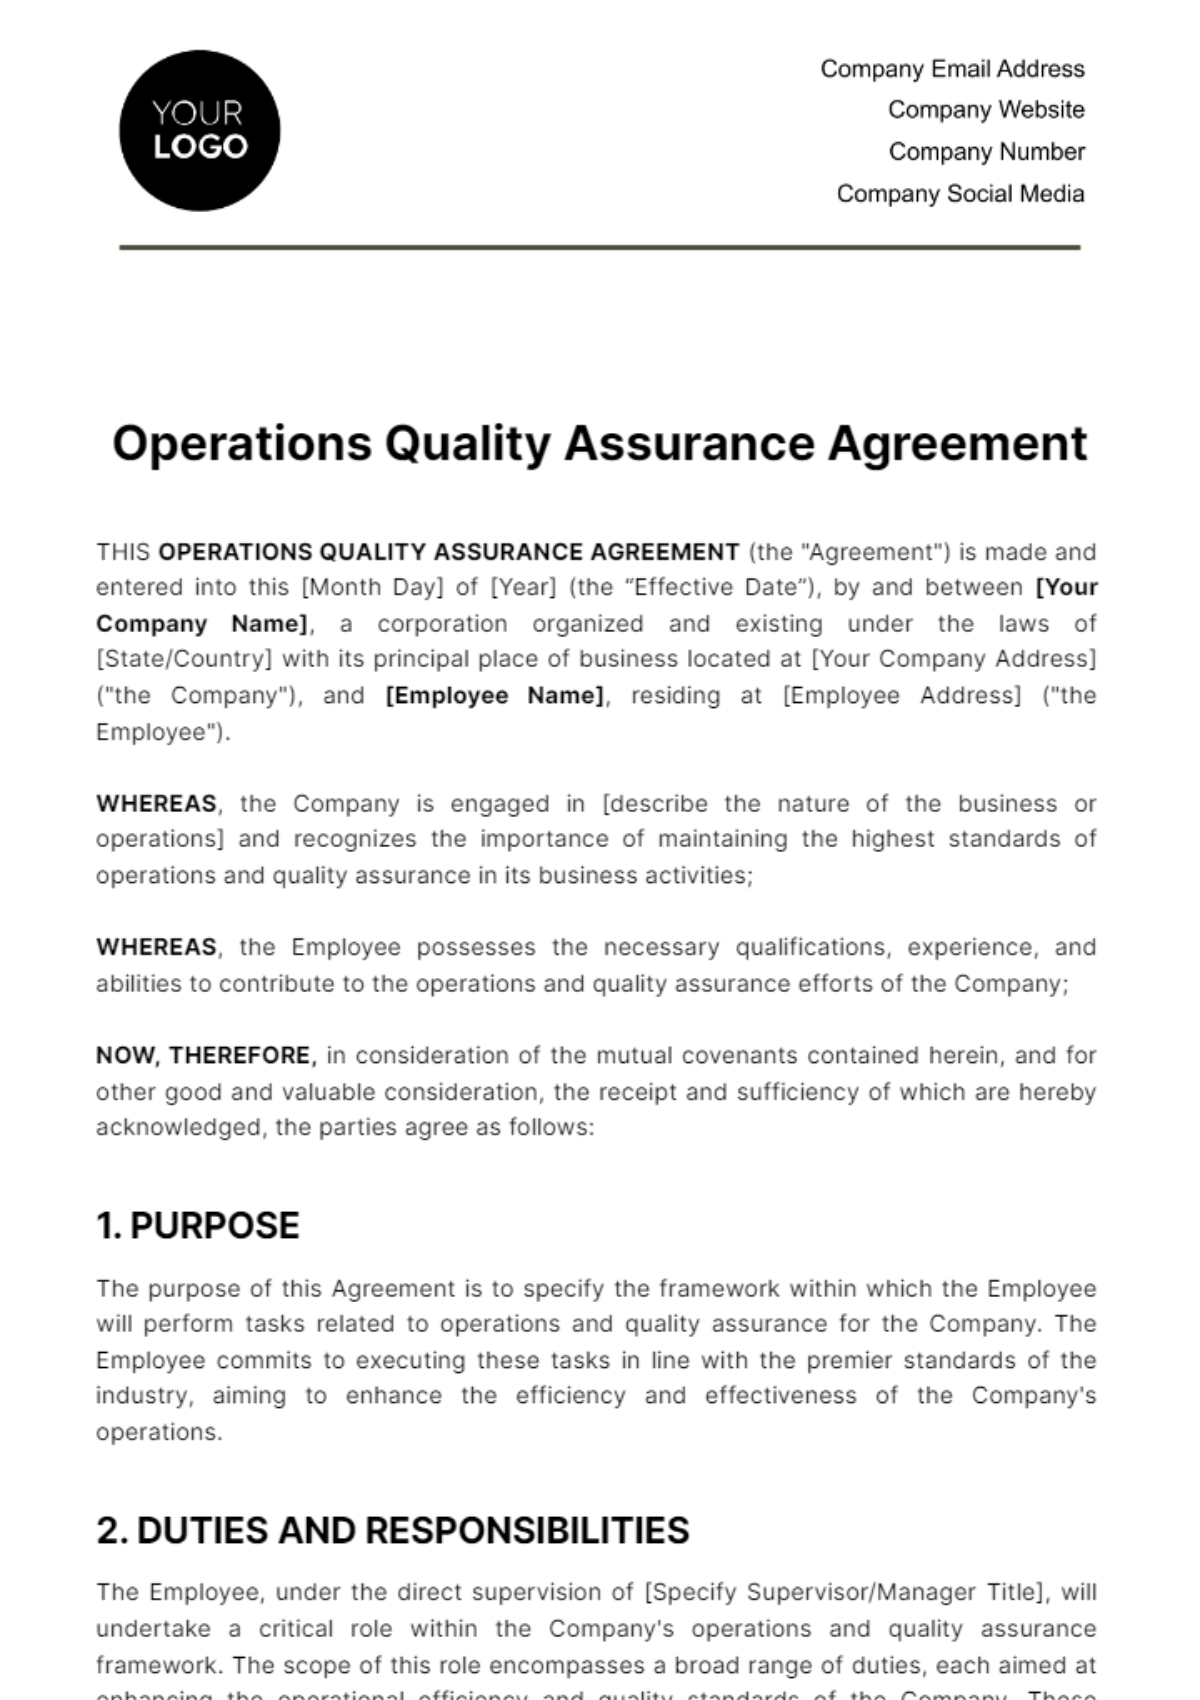 Free Operations Quality Assurance Agreement Template